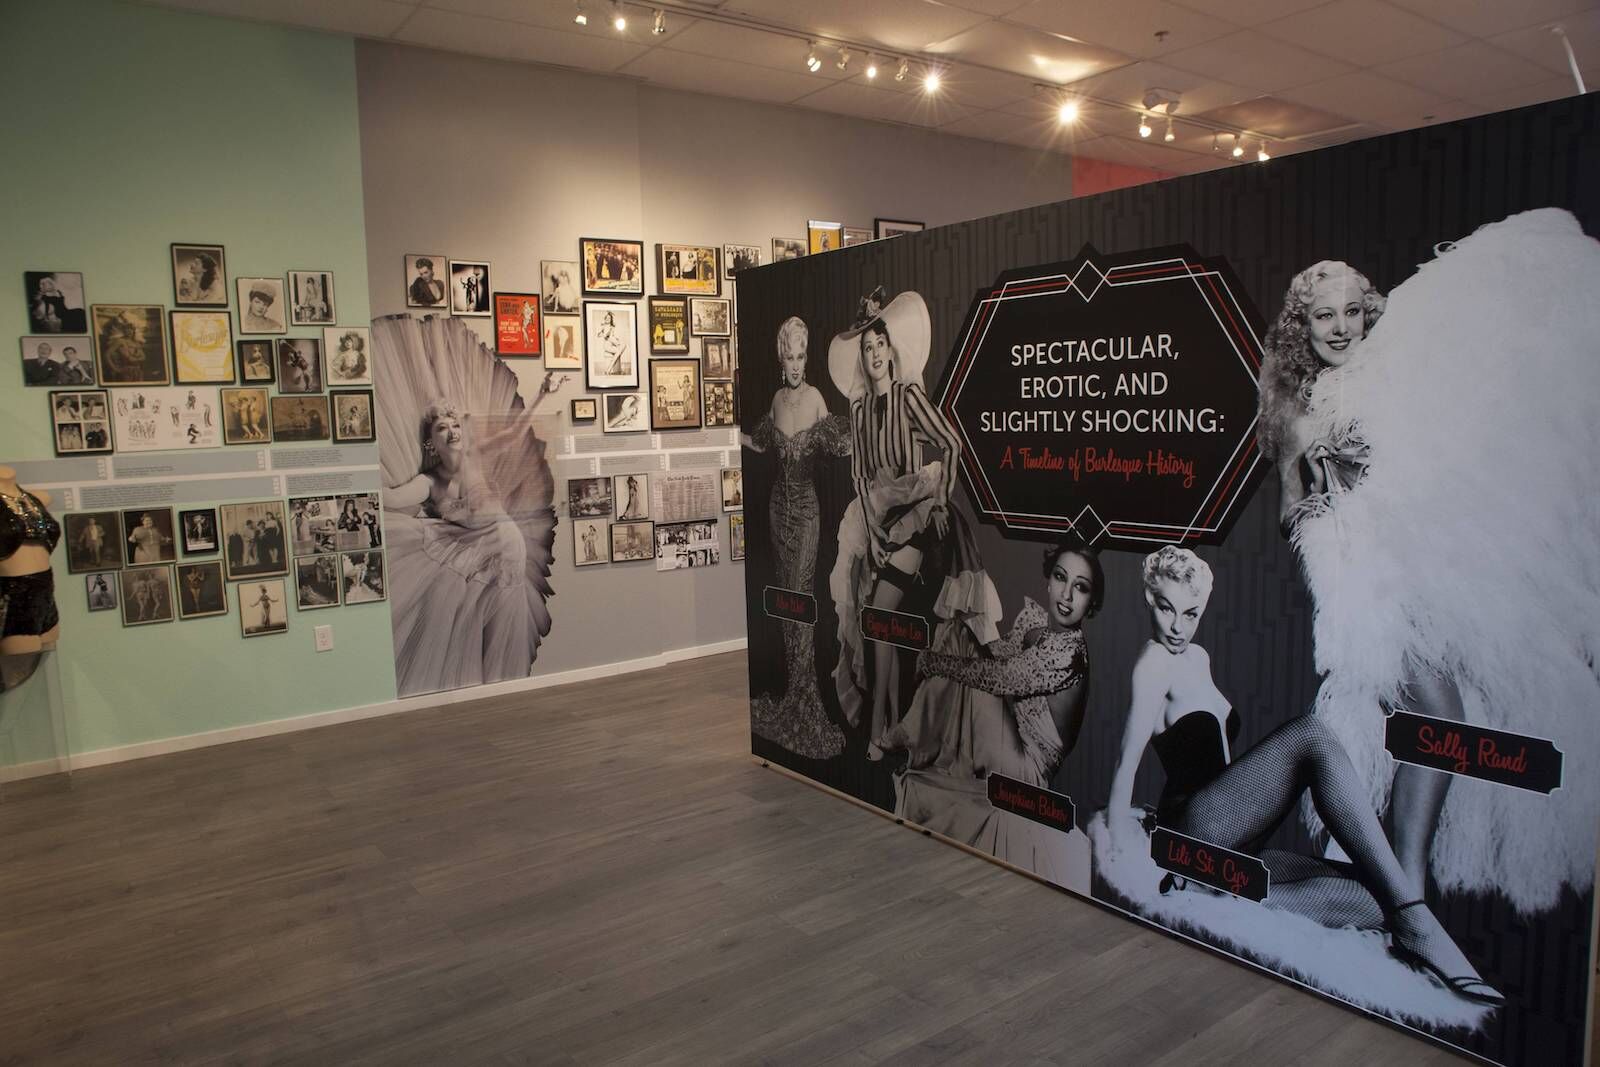 Exhibition at the Burlesque Hall of Fame in Las Vegas. One of the best museums in Las Vegas.